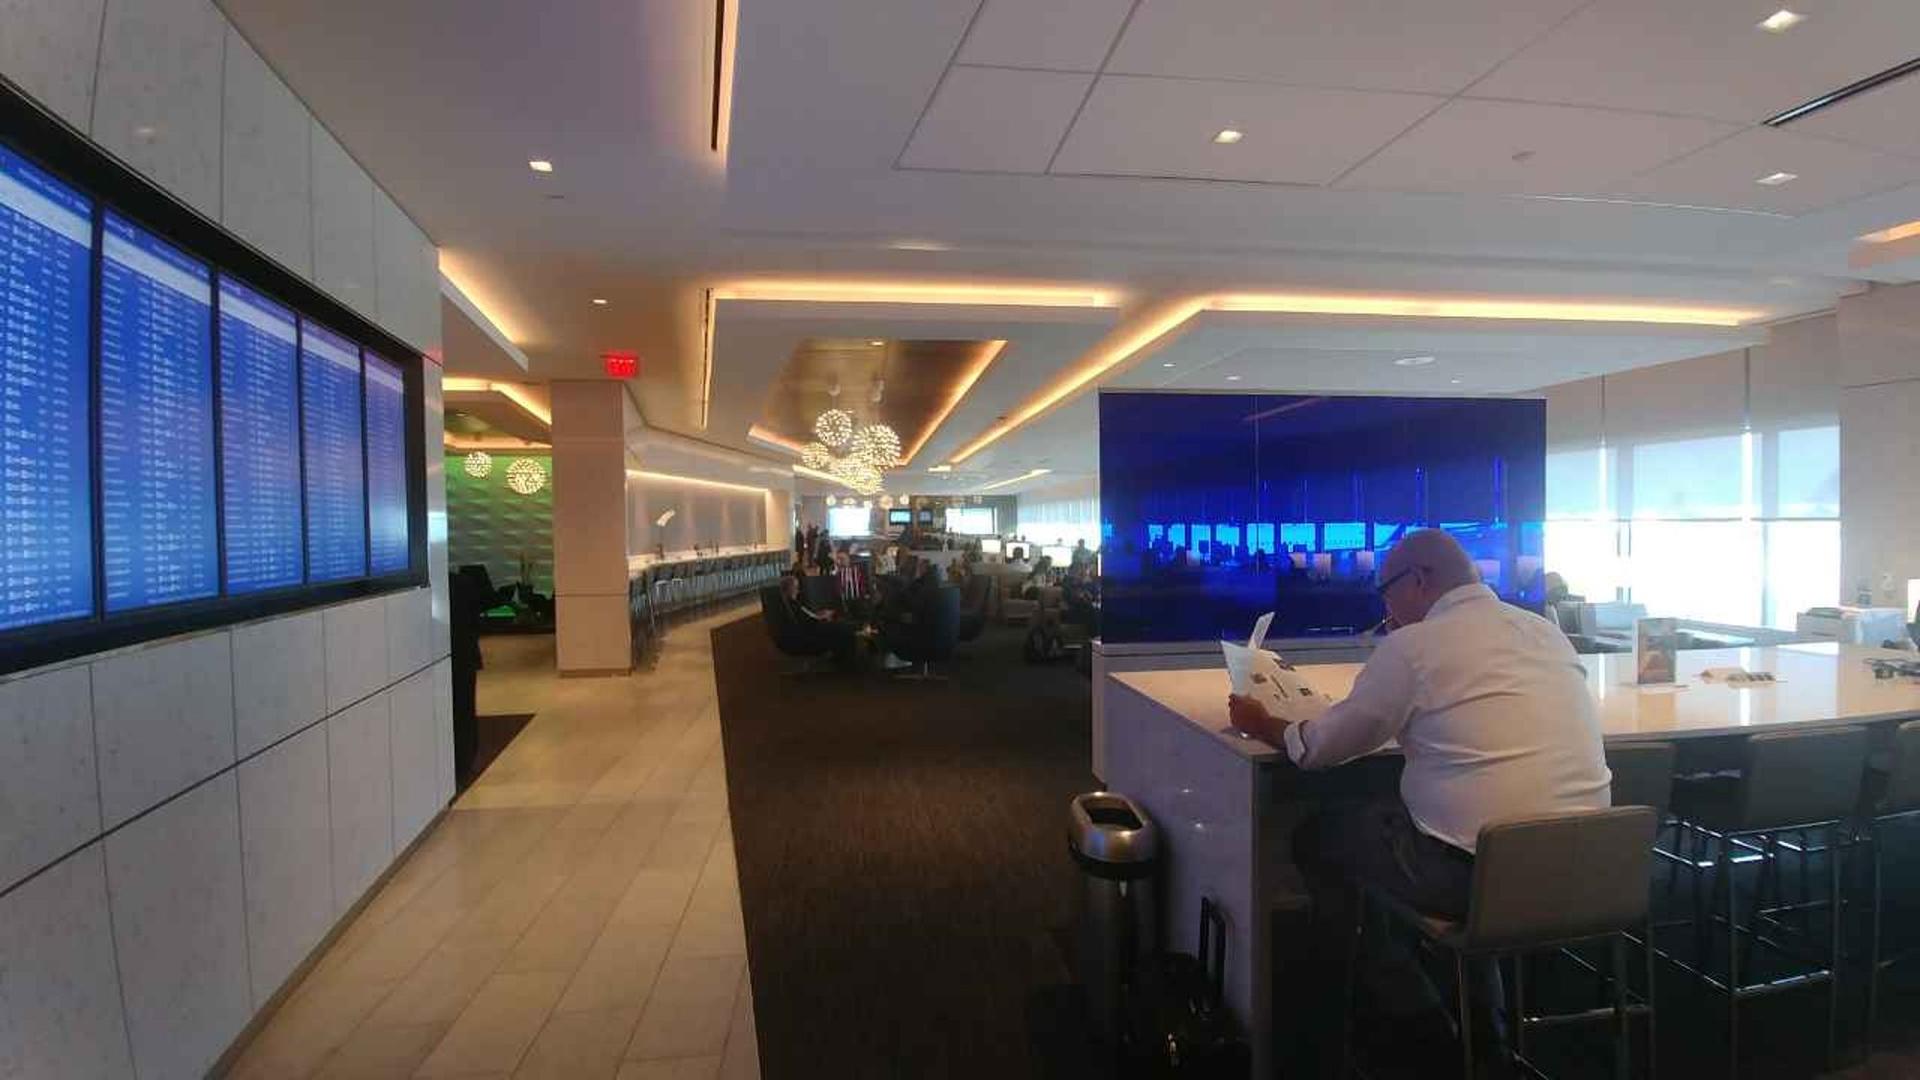 United Airlines United Club image 4 of 7